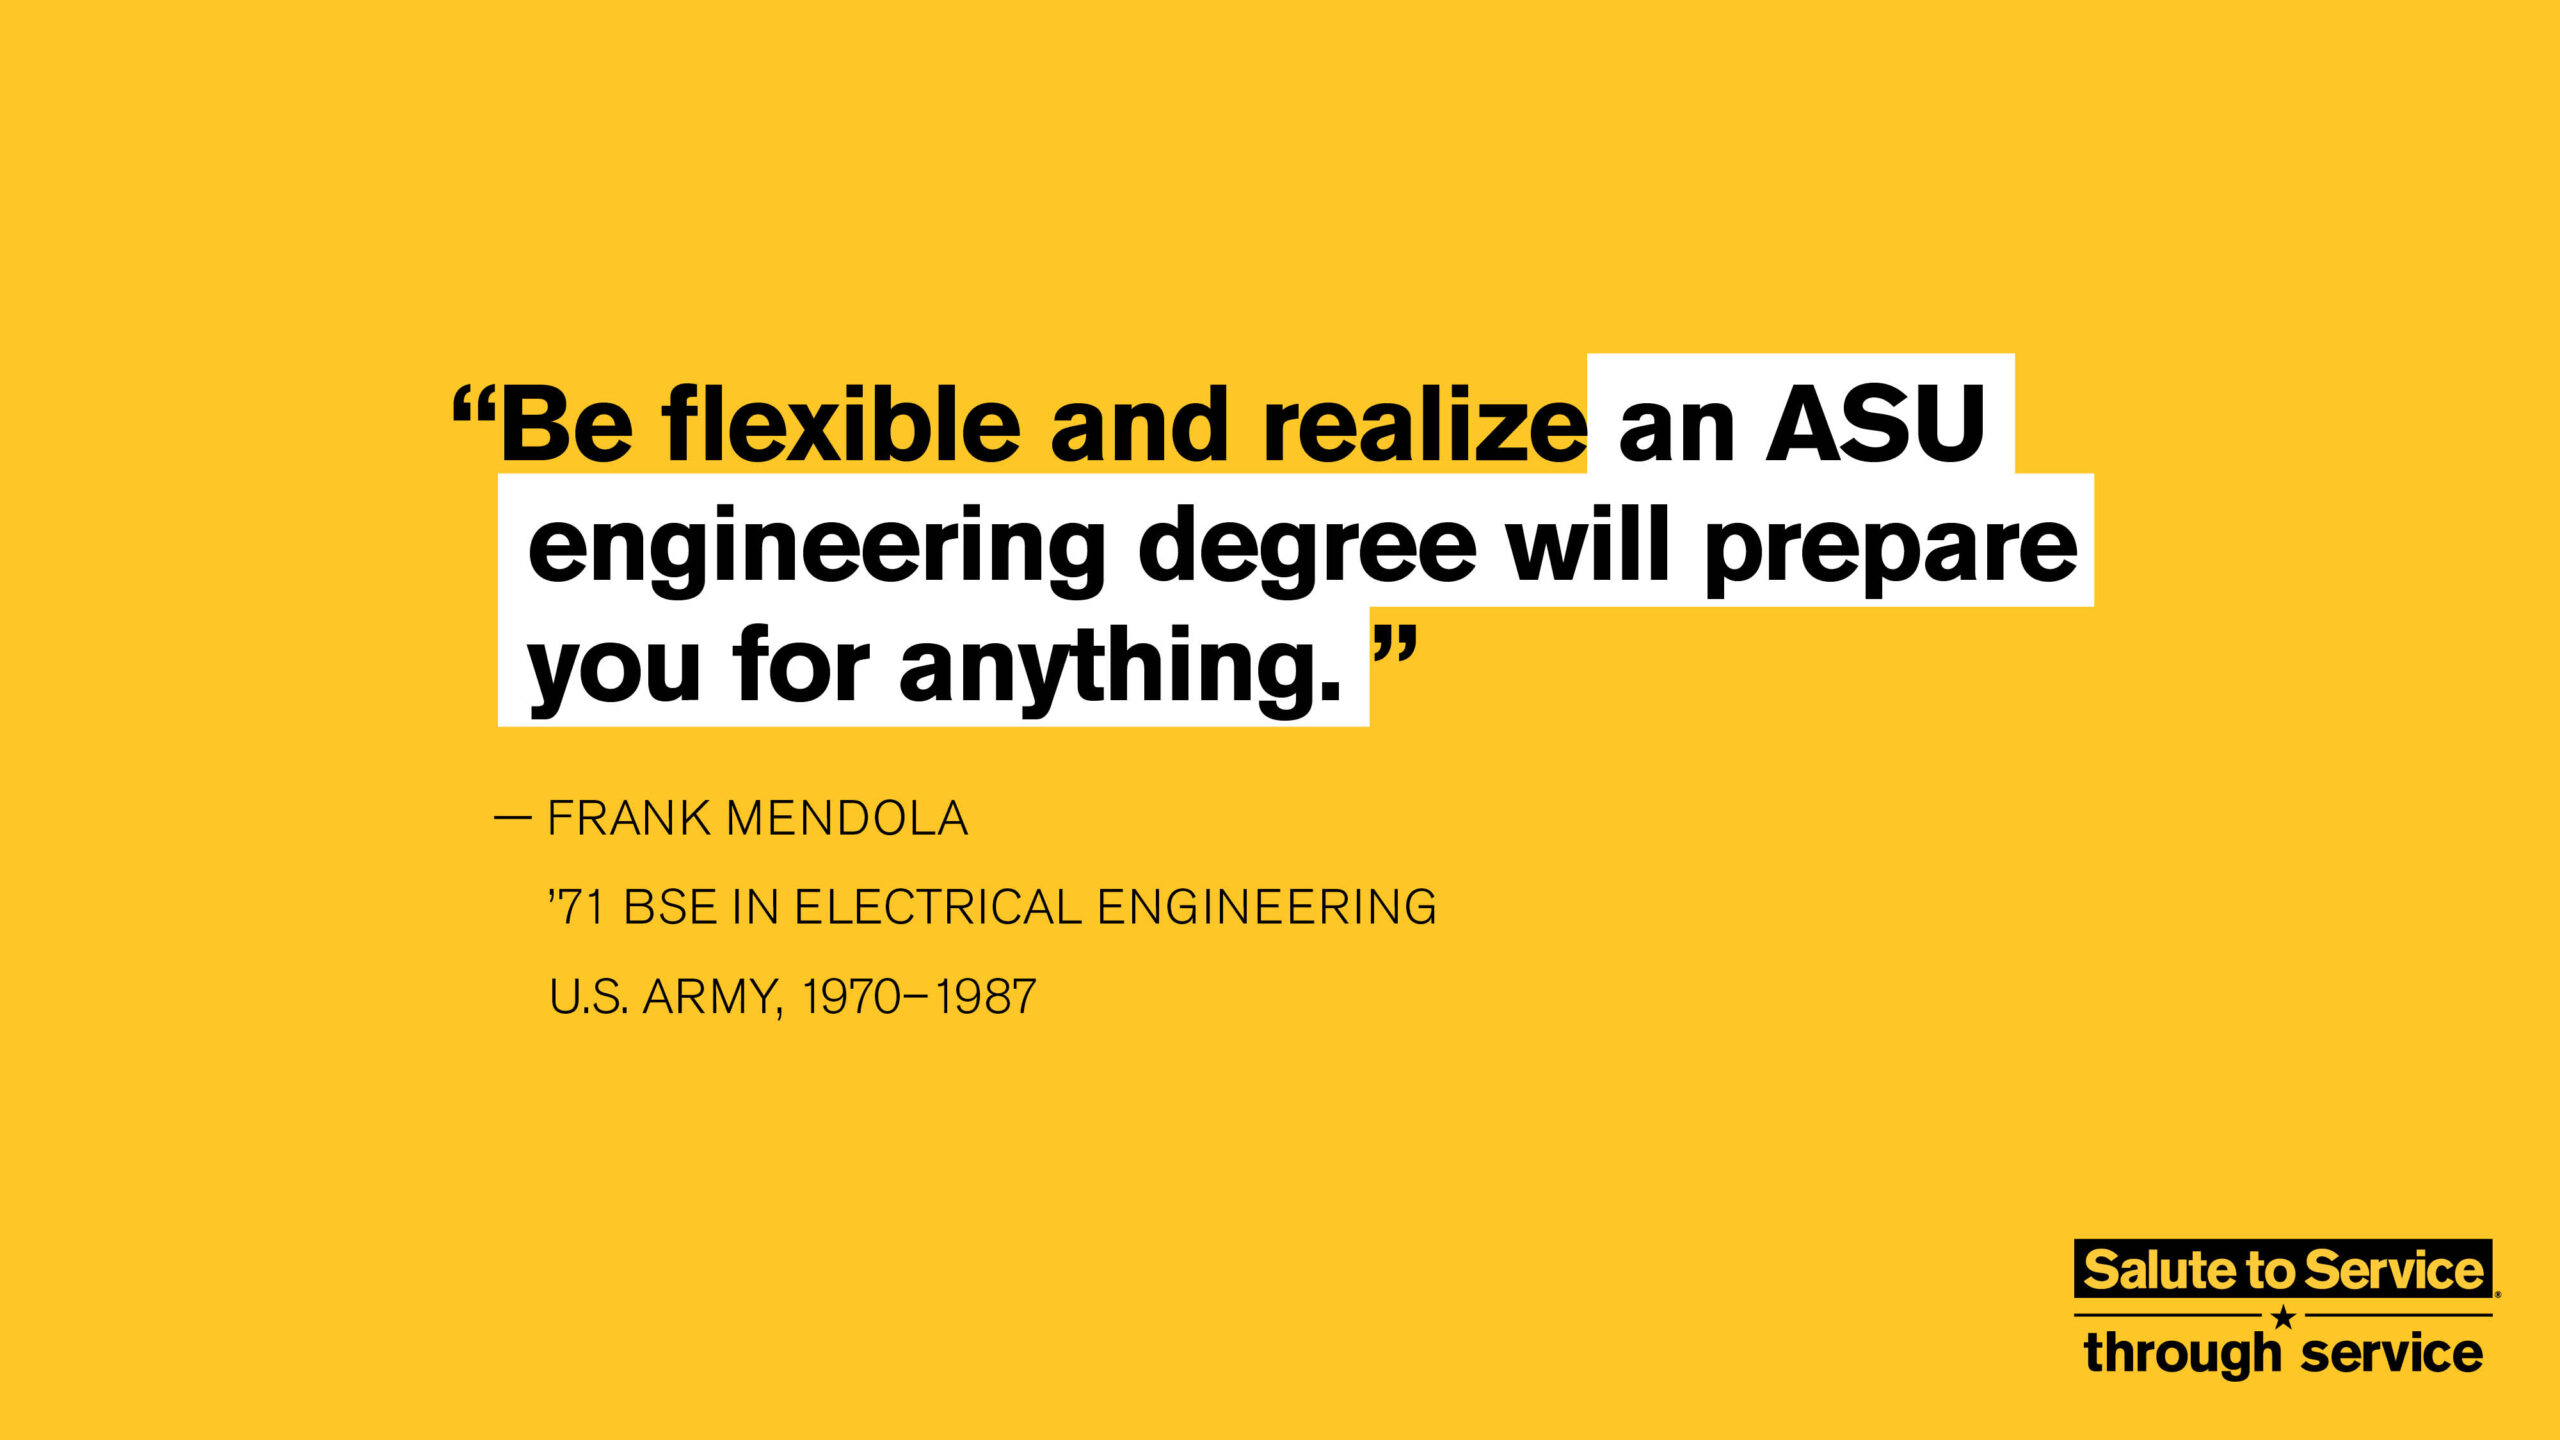 Salute to Service graphic with text that says "Be flexible and realize an ASU engineering degree will prepare you for anything." - Frank Mendola